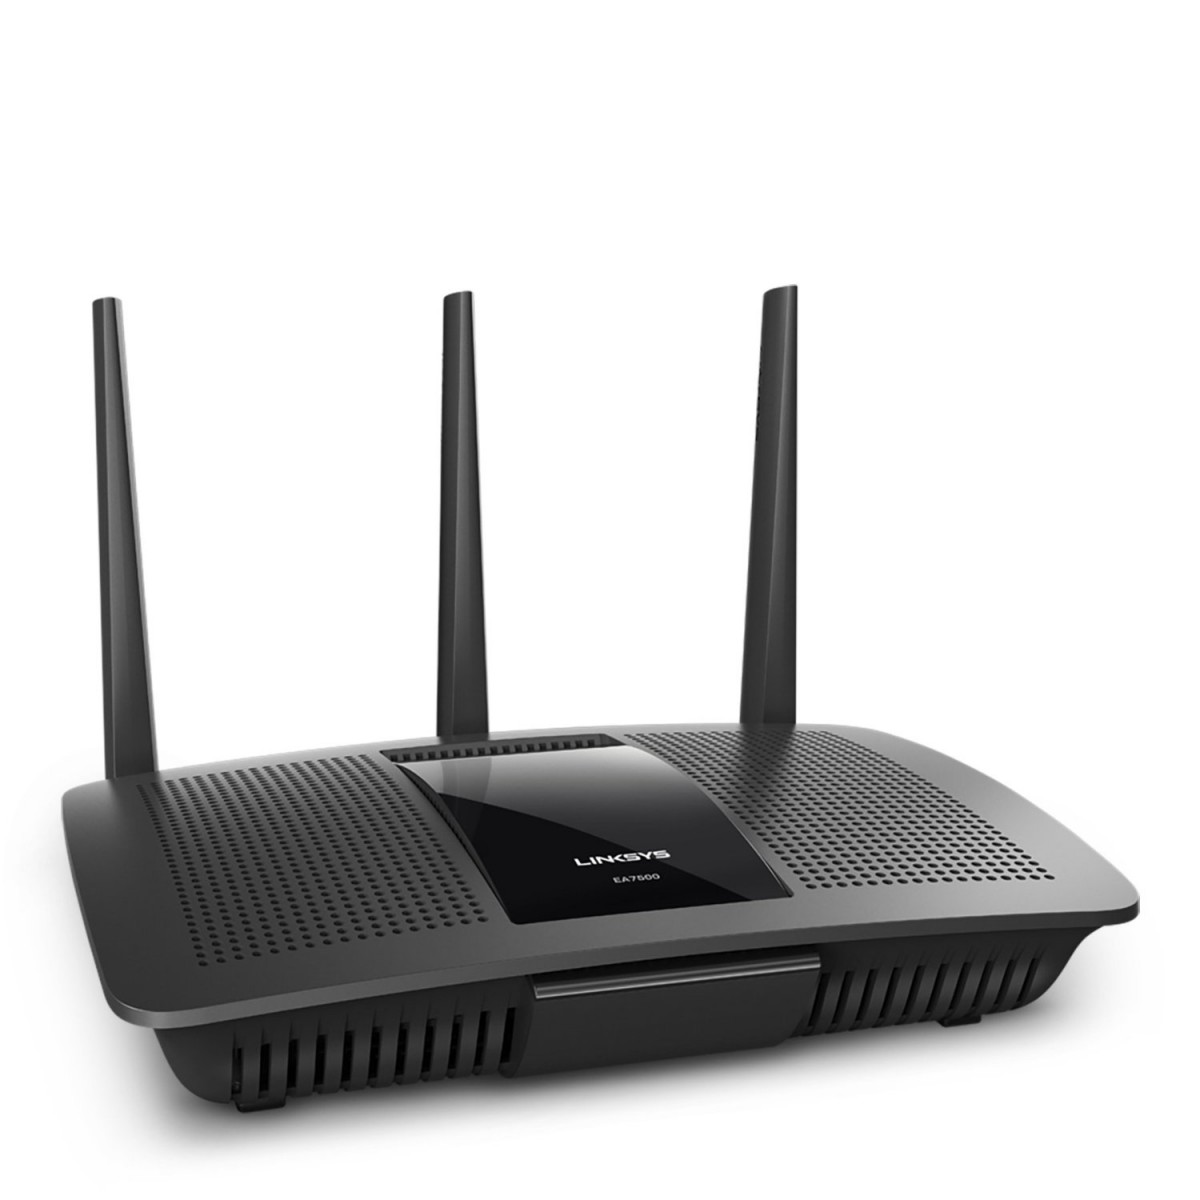 linksys ac1900 (max stream ea7500) wifi router review